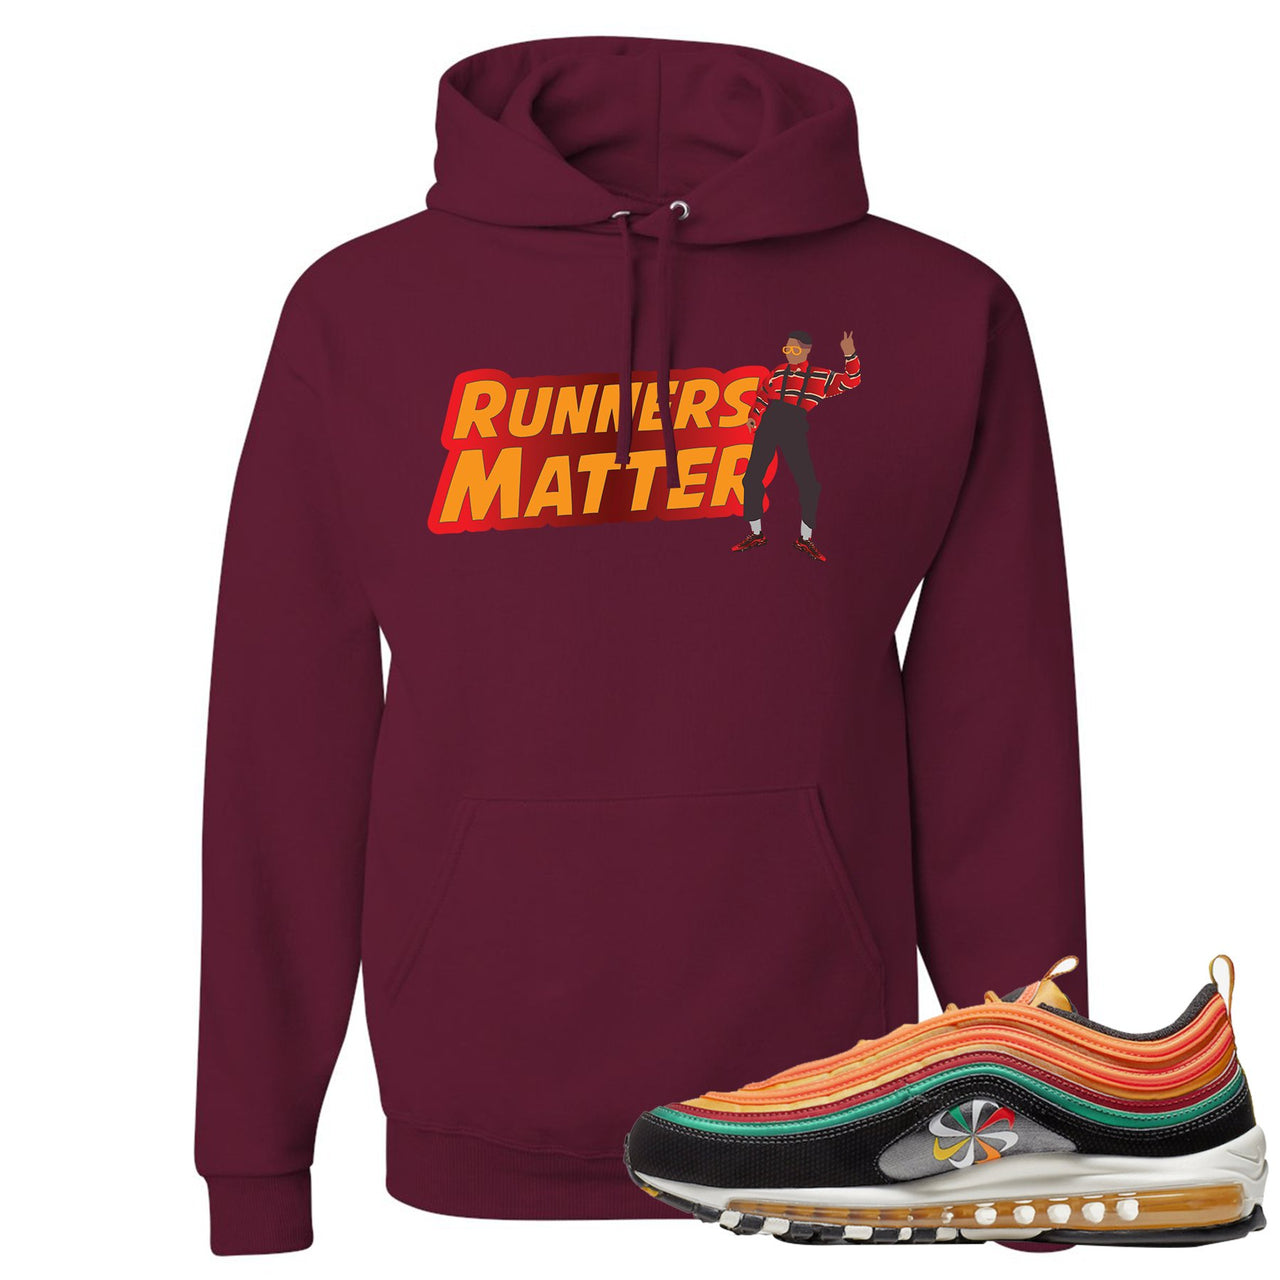 Printed on the front of the Air Max 97 Sunburst maroon sneaker matching pullover hoodie is the Runners Matter logo